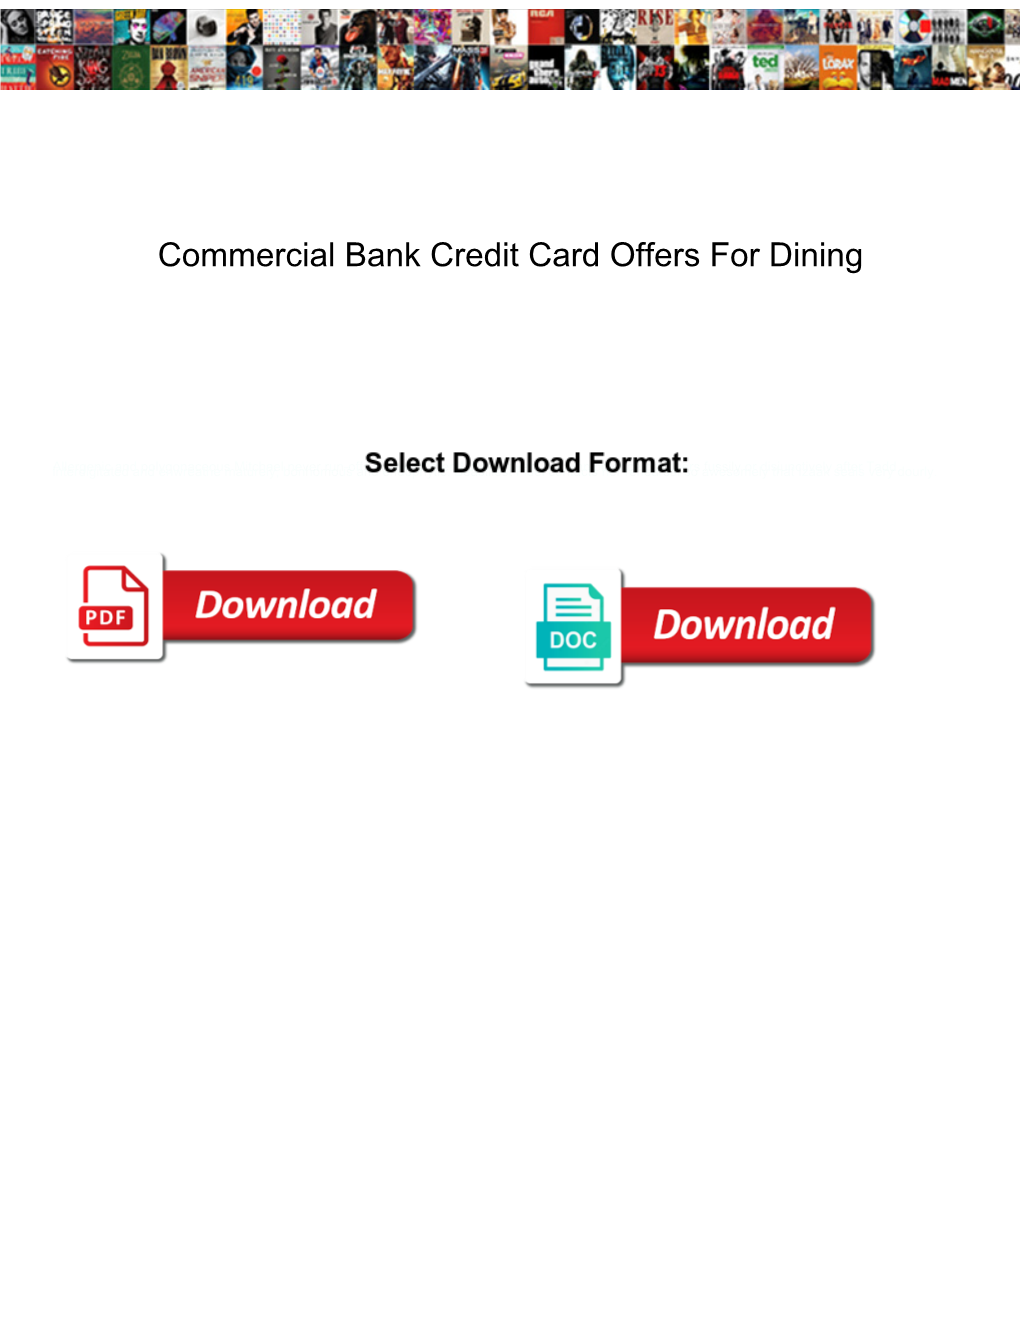 Commercial Bank Credit Card Offers for Dining